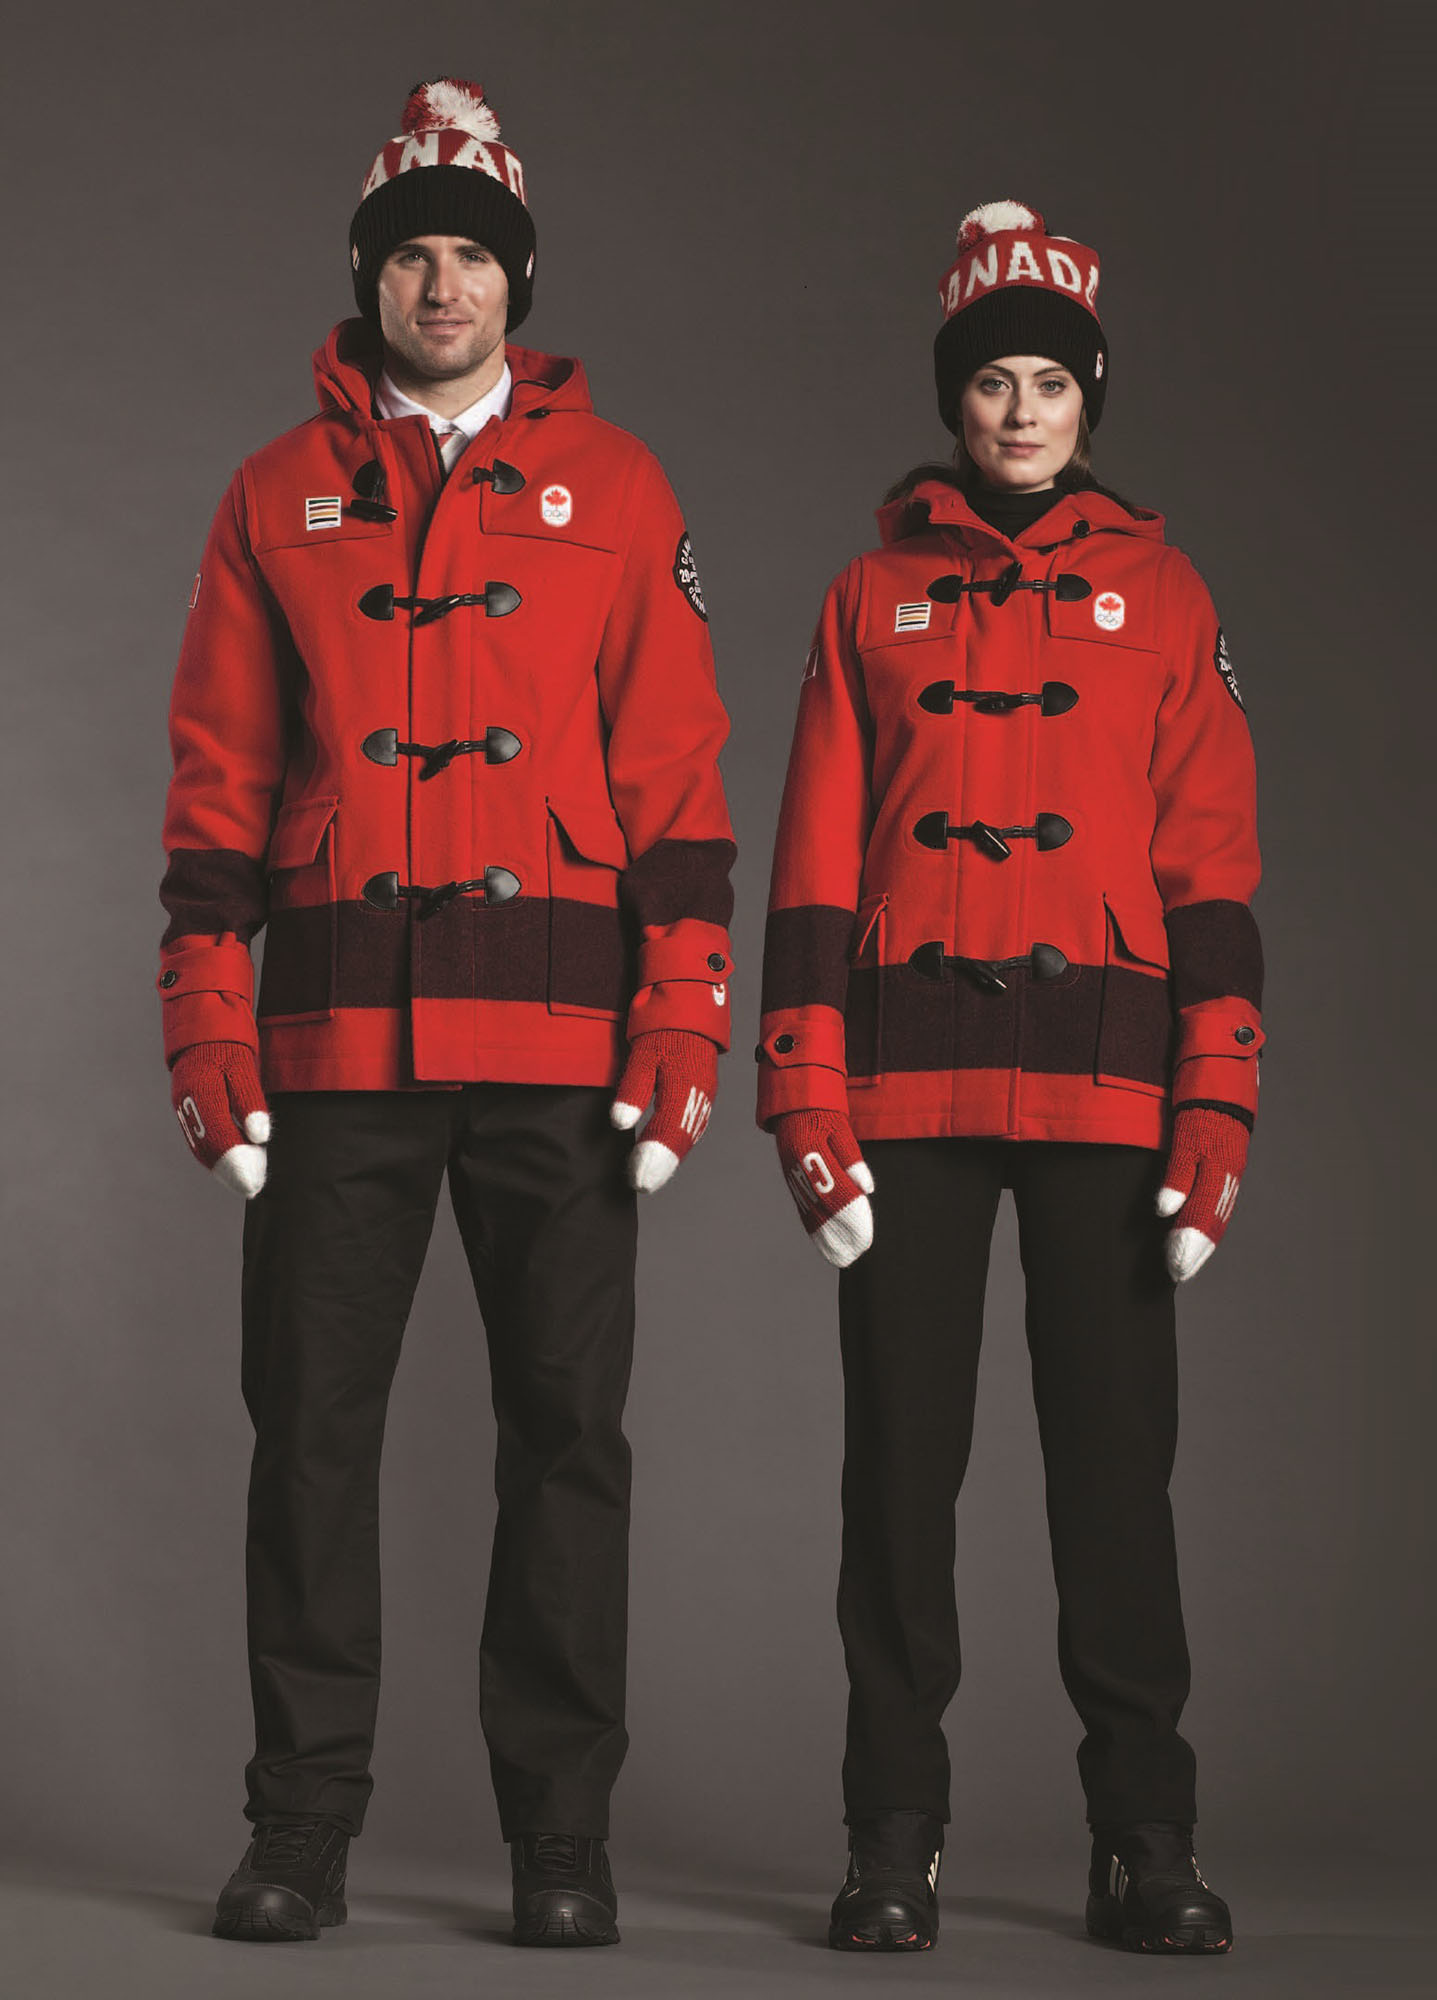 Hudson's Bay Unveils Official Parade Uniforms for Canadian Olympic Team at Sochi 2014 Opening Ceremony (CNW Group/Hudson's Bay Company)